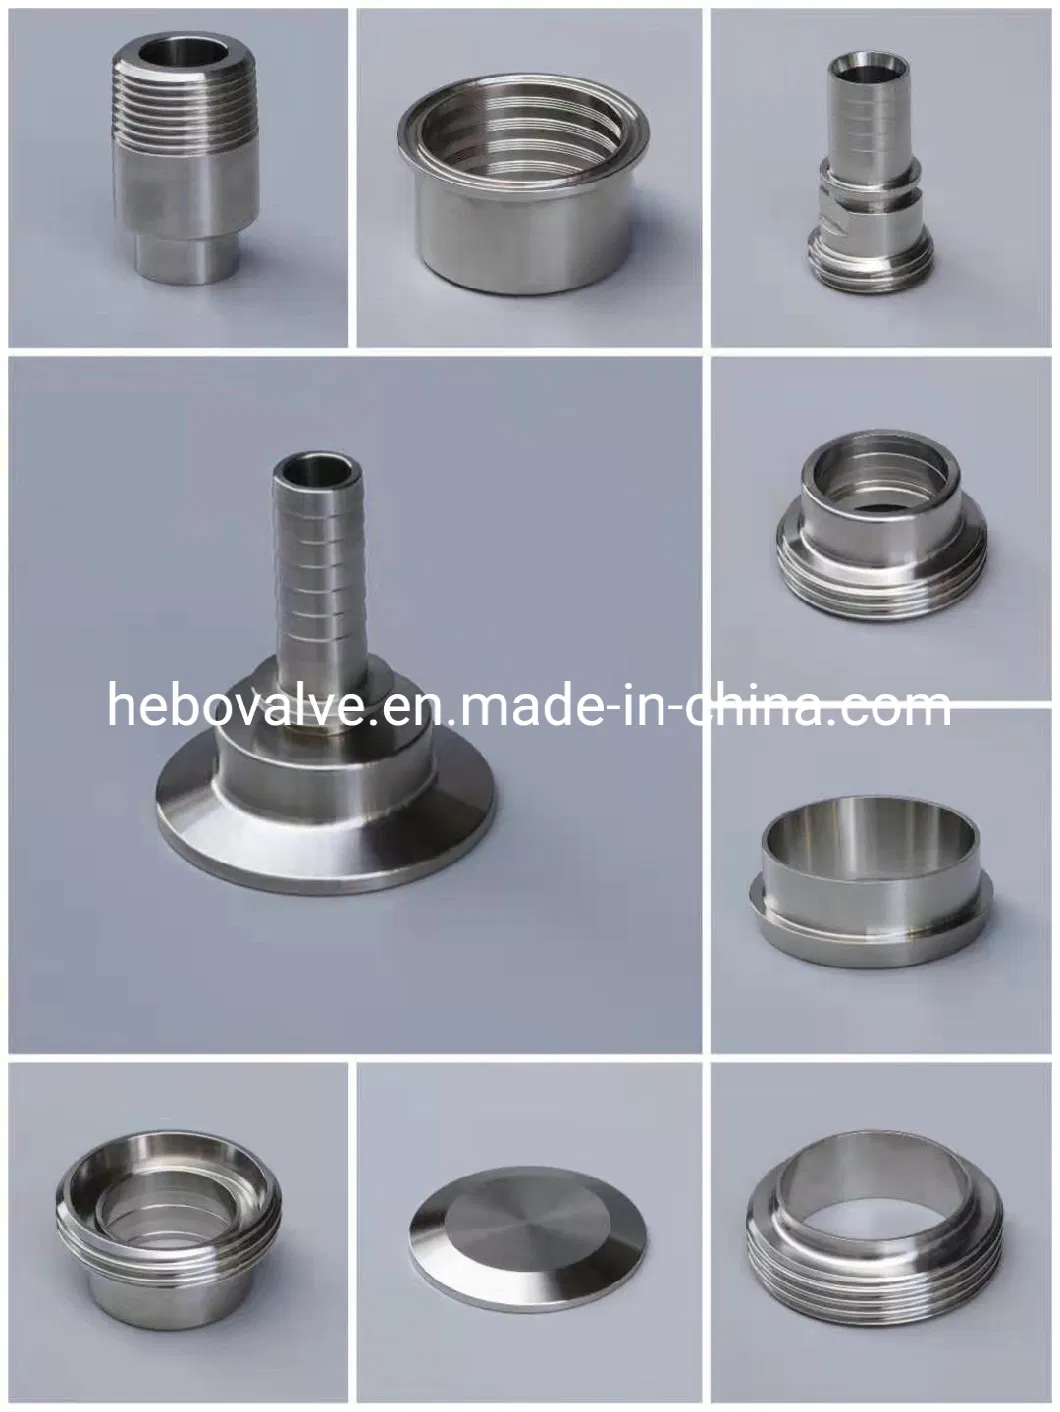 3A /SMS/DIN Sanitary Stainless Steel Hose Nipple for Food/Dairy/Pharmaceutical Grade